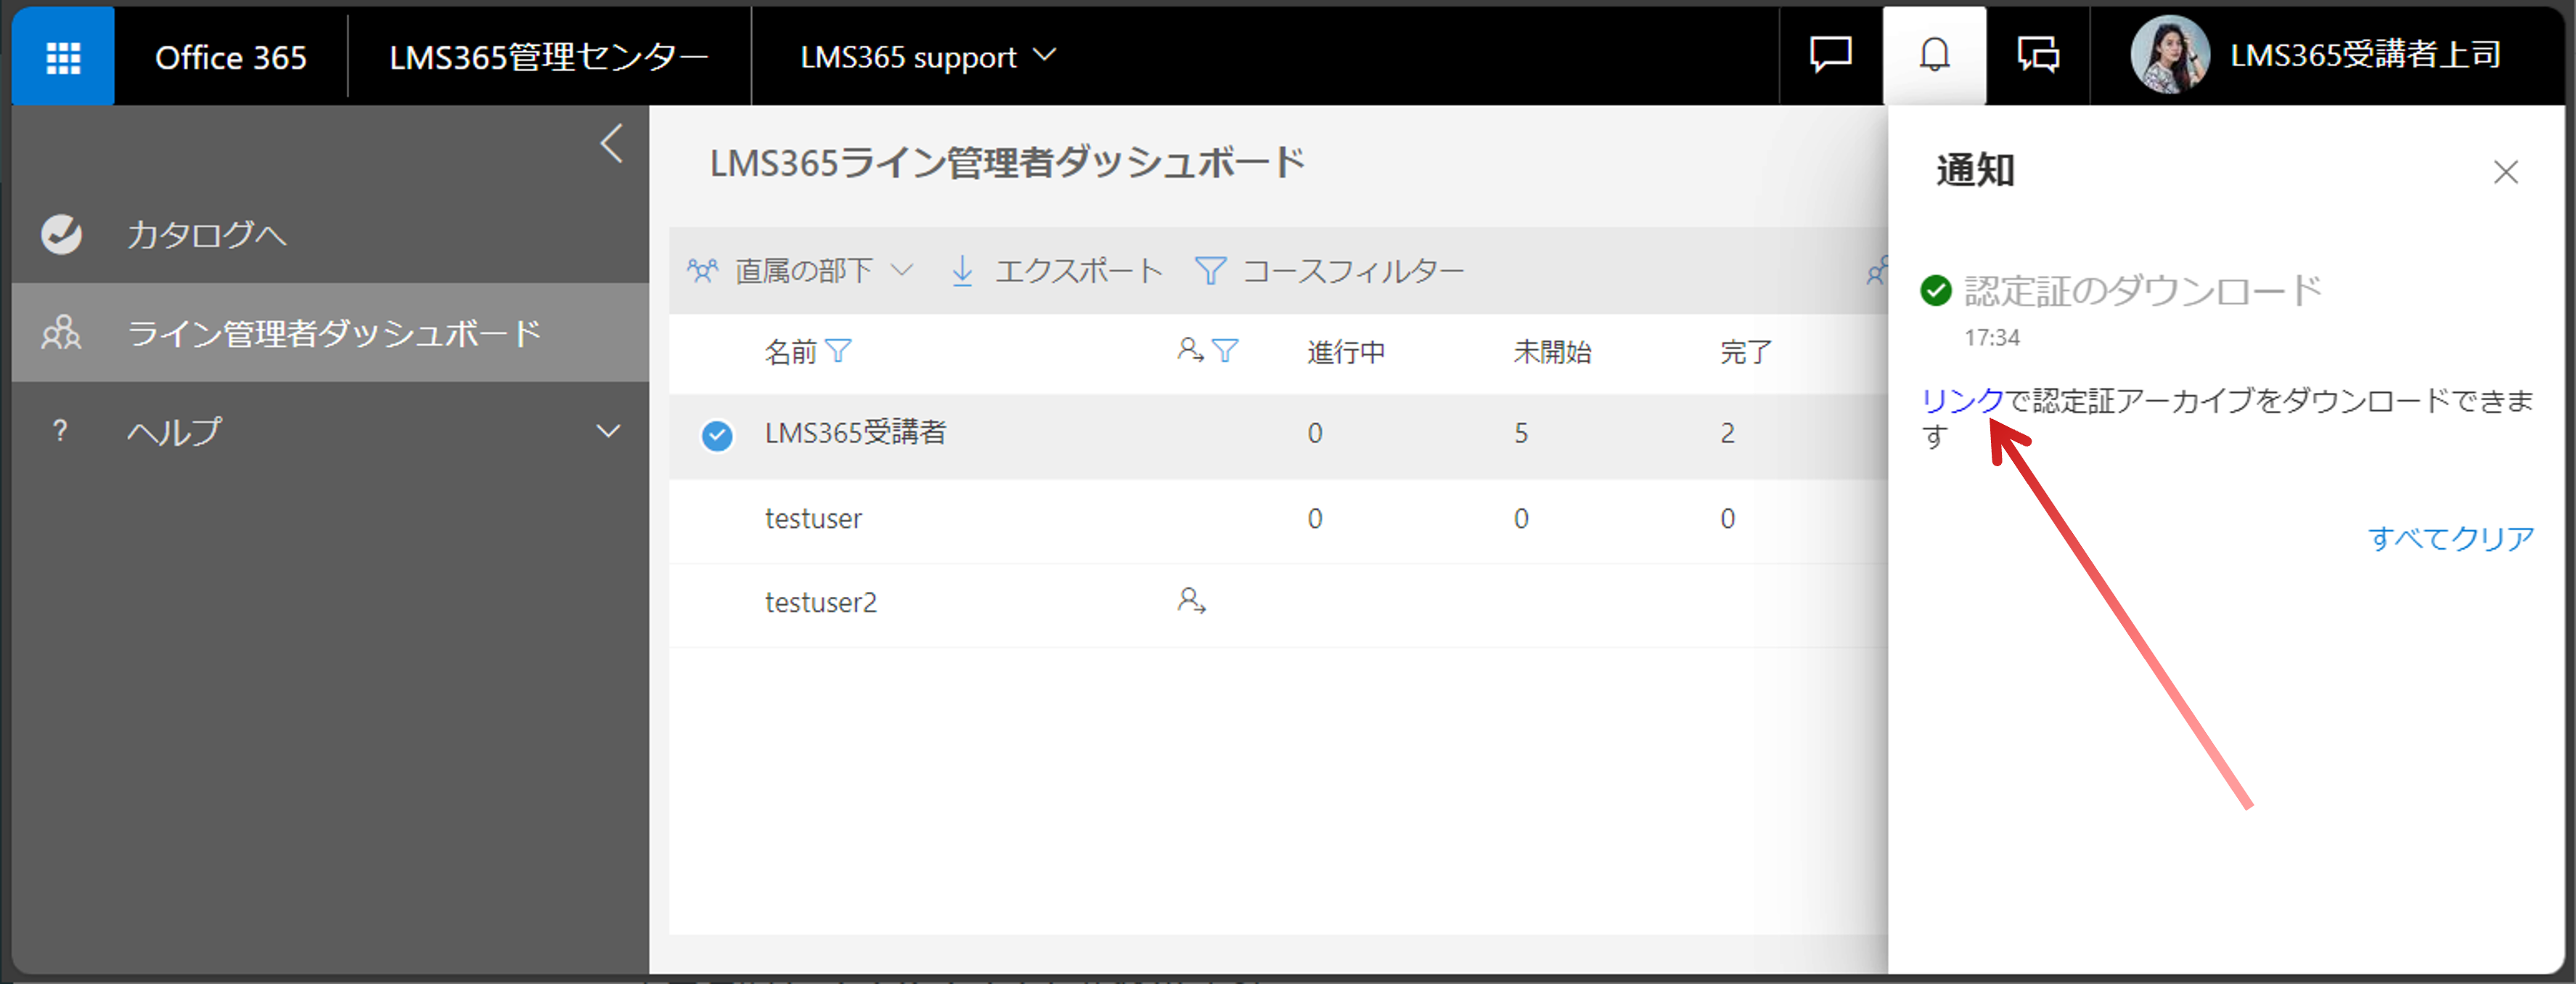 Line Manager Dashboard_User administration18.png